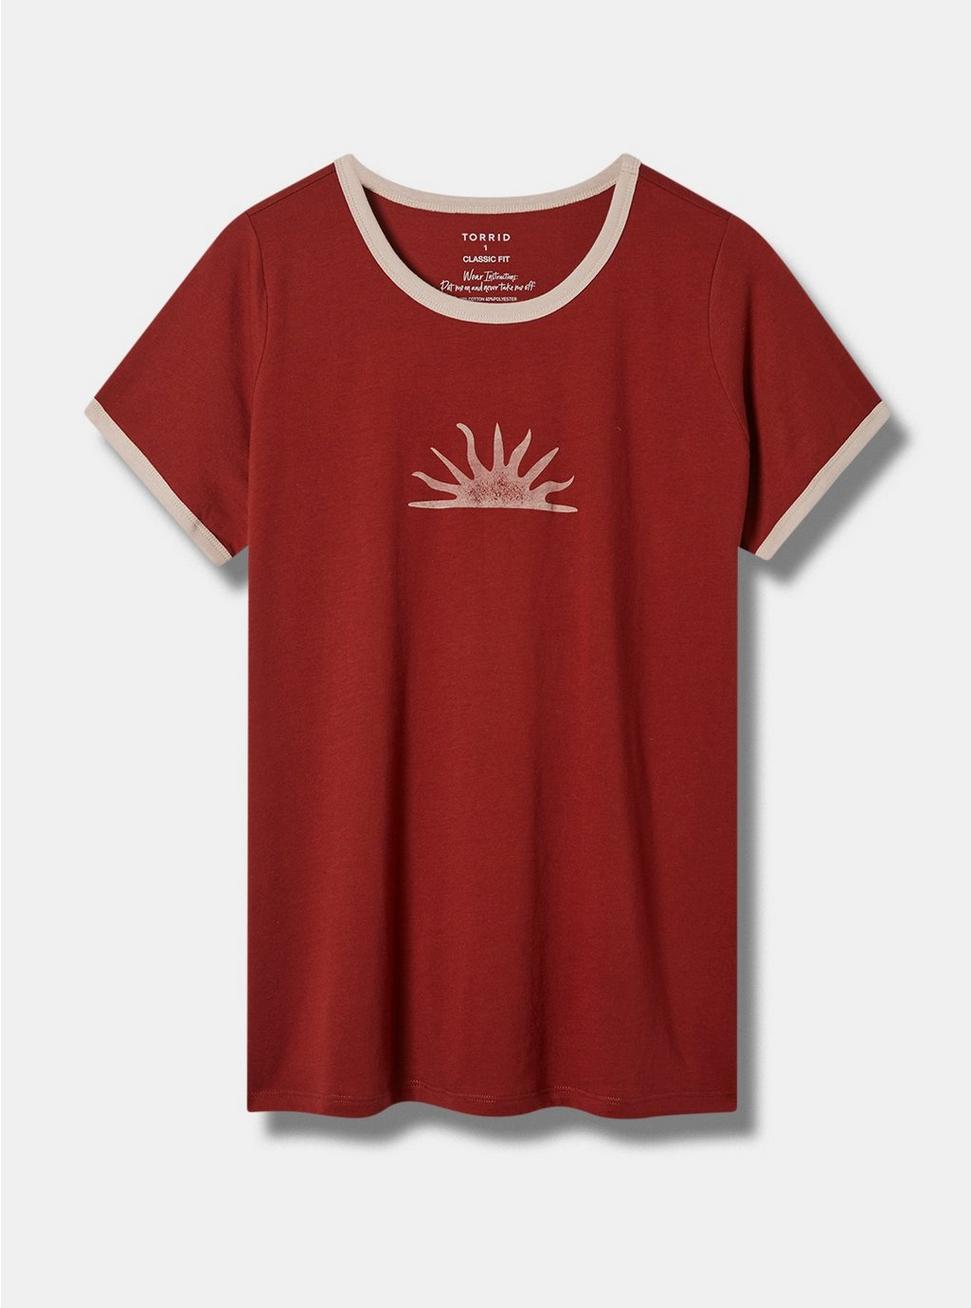 Sun Rays Classic Fit Cotton Crew Neck Ringer Tee, BROWN, hi-res